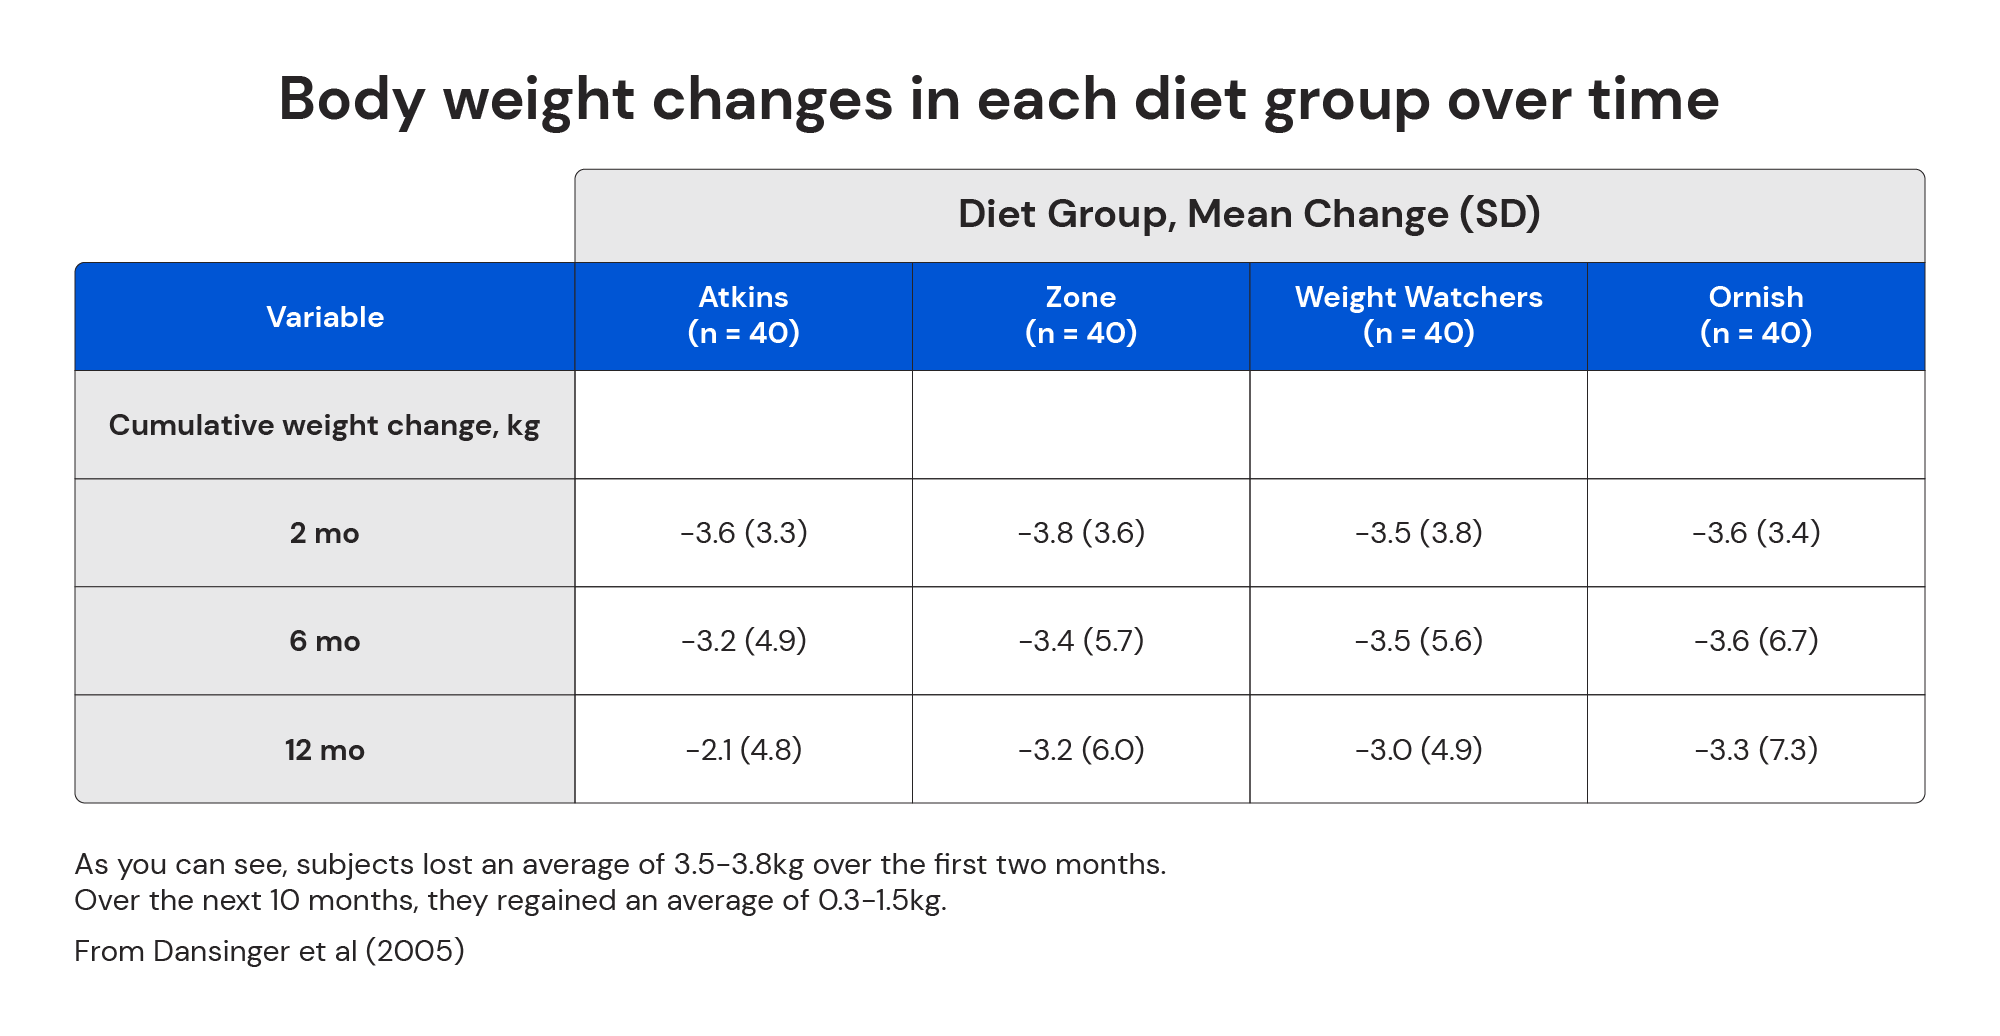 Body weight changes in each diet group over time from Dansinger et al